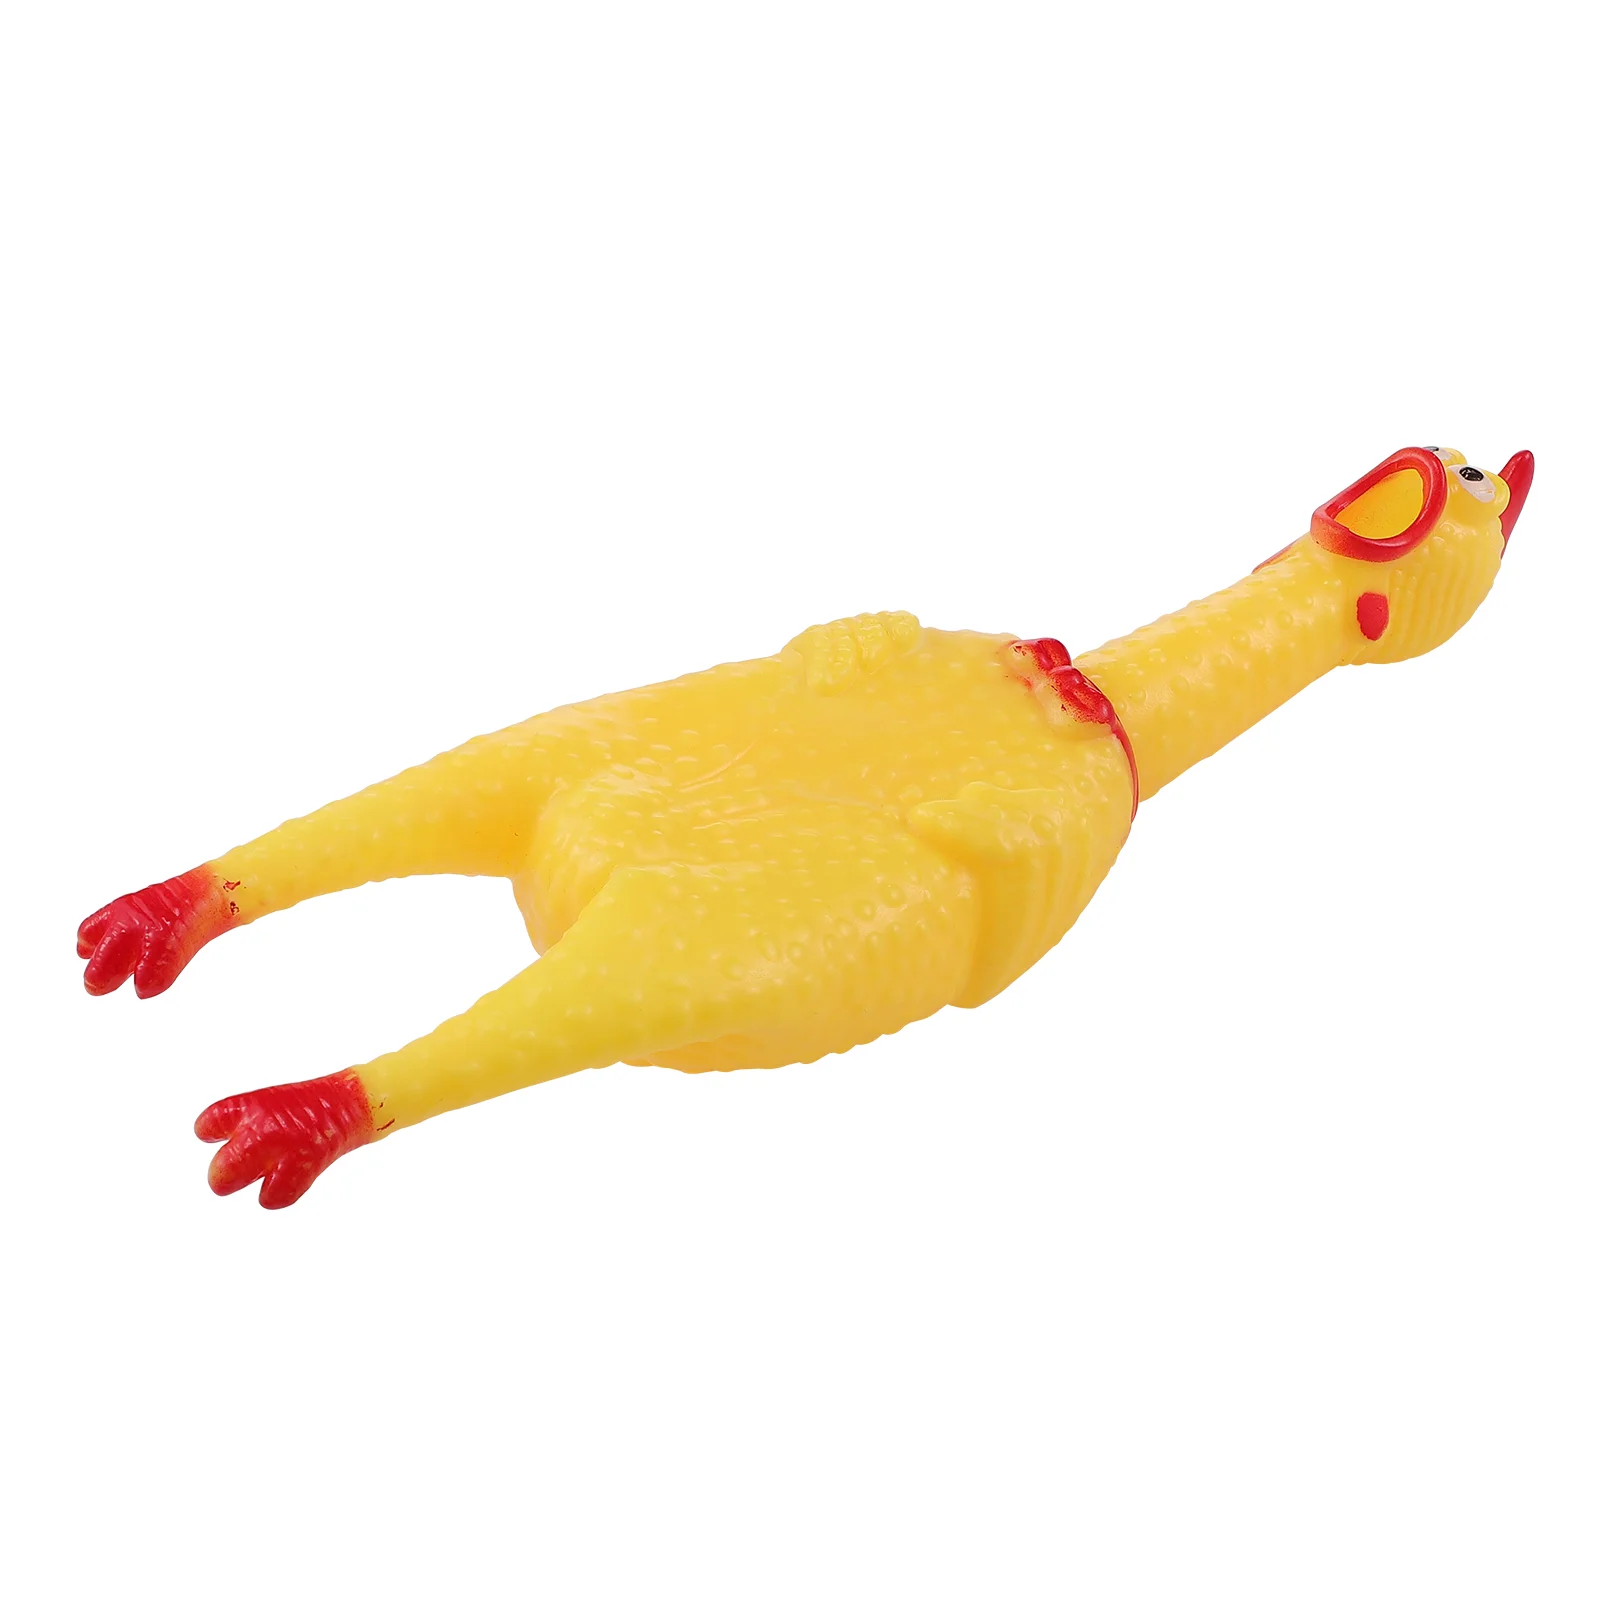 

Squawking Chicken Children Toy Prank Novelty Toys Squeeze Squeaky Stretchy Boys Scream